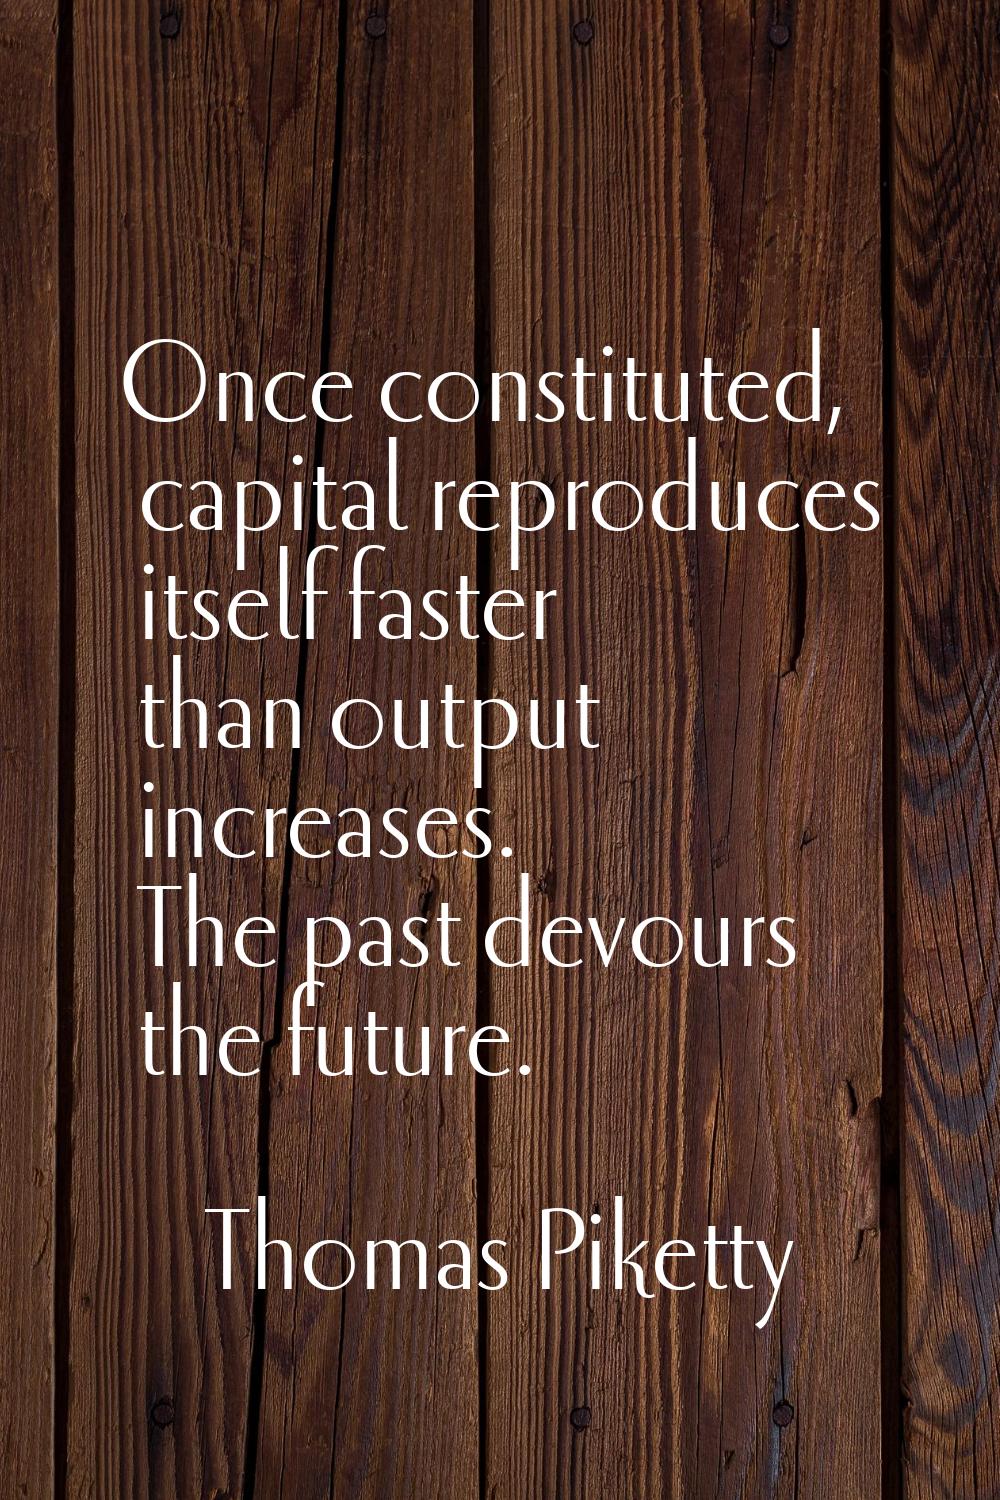 Once constituted, capital reproduces itself faster than output increases. The past devours the futu